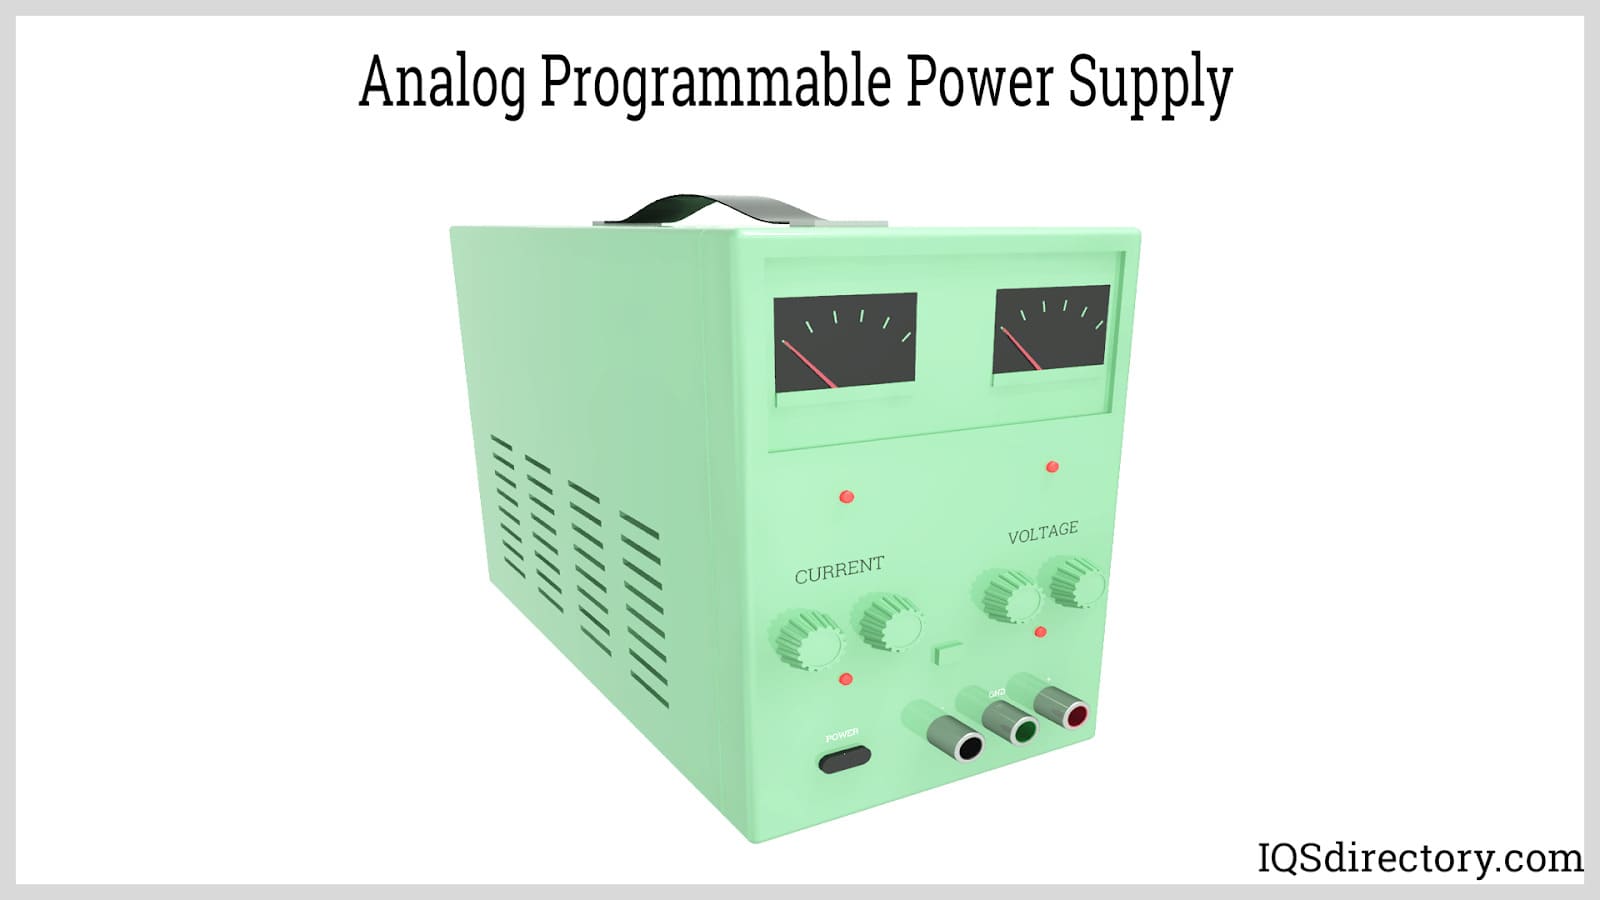 Analog Programmable Power Supply